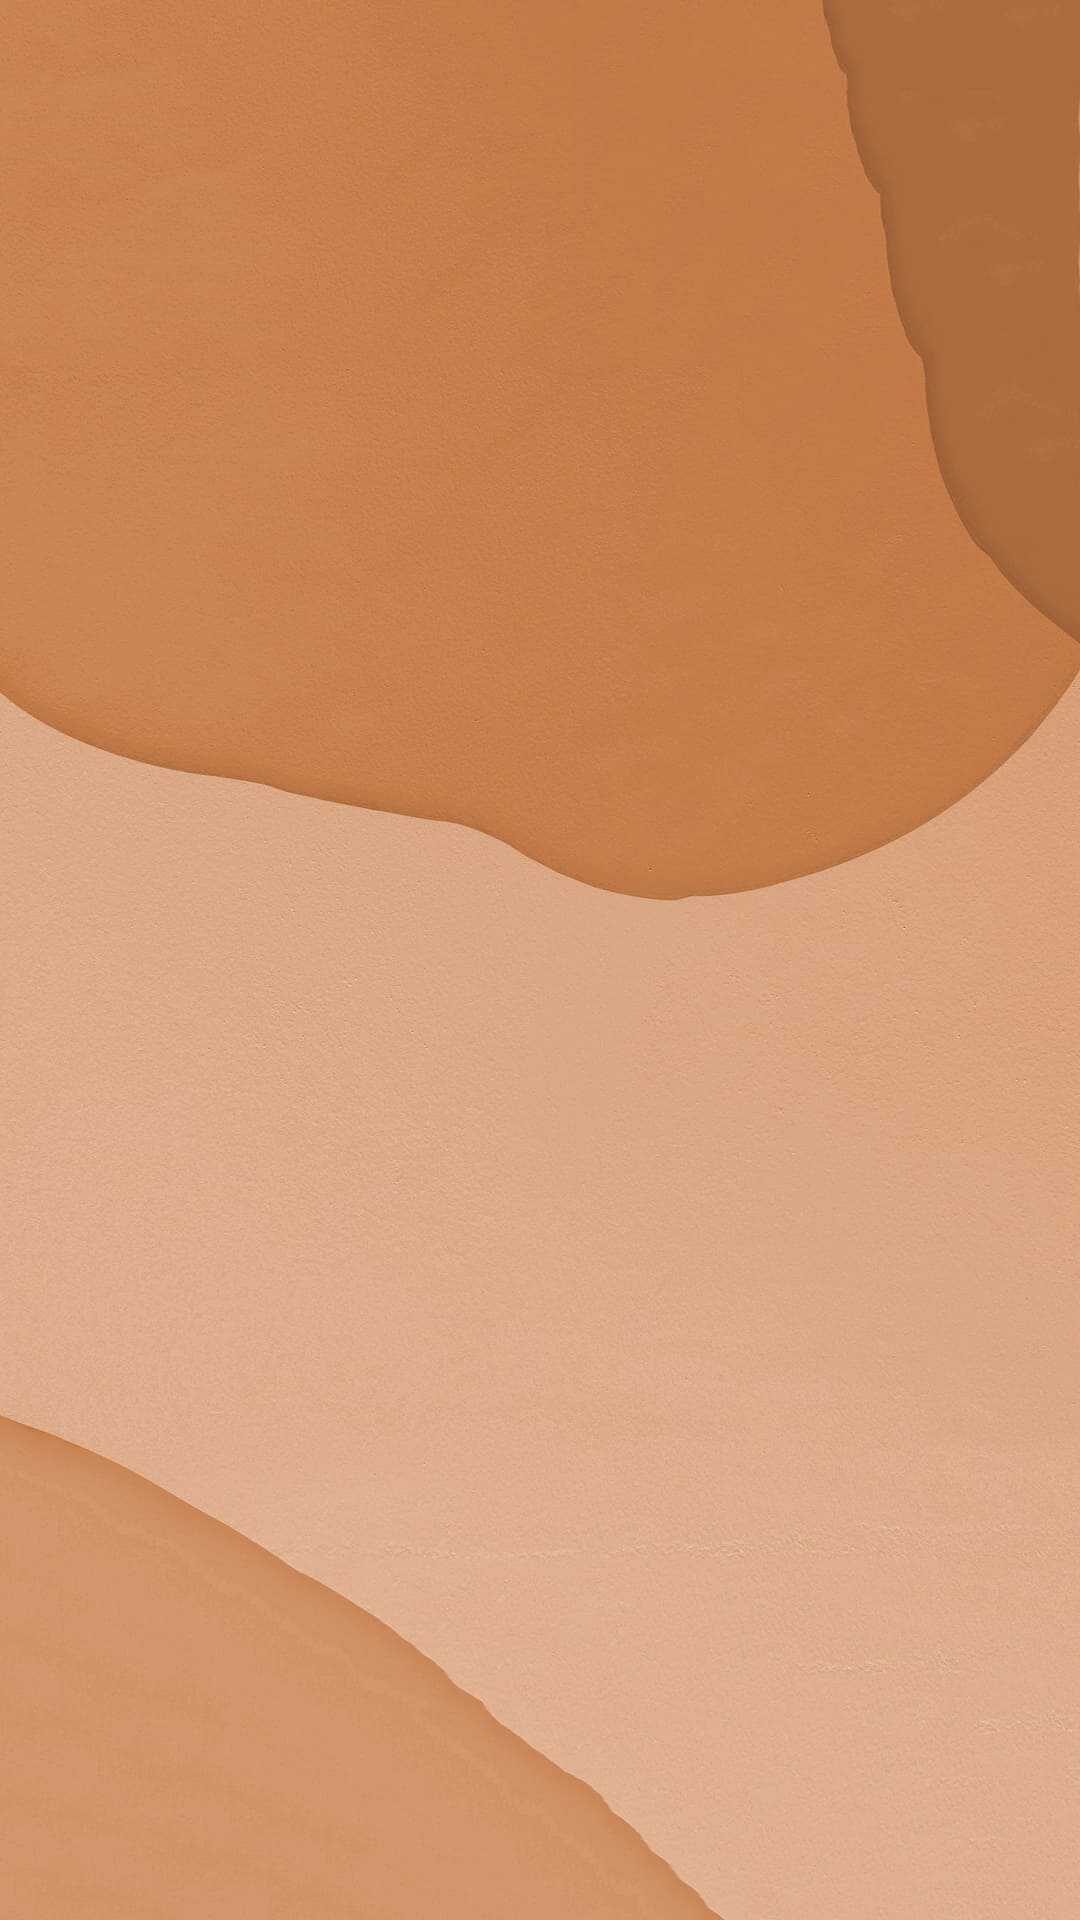 brown sand near body of water during daytime iPhone Wallpapers Free Download